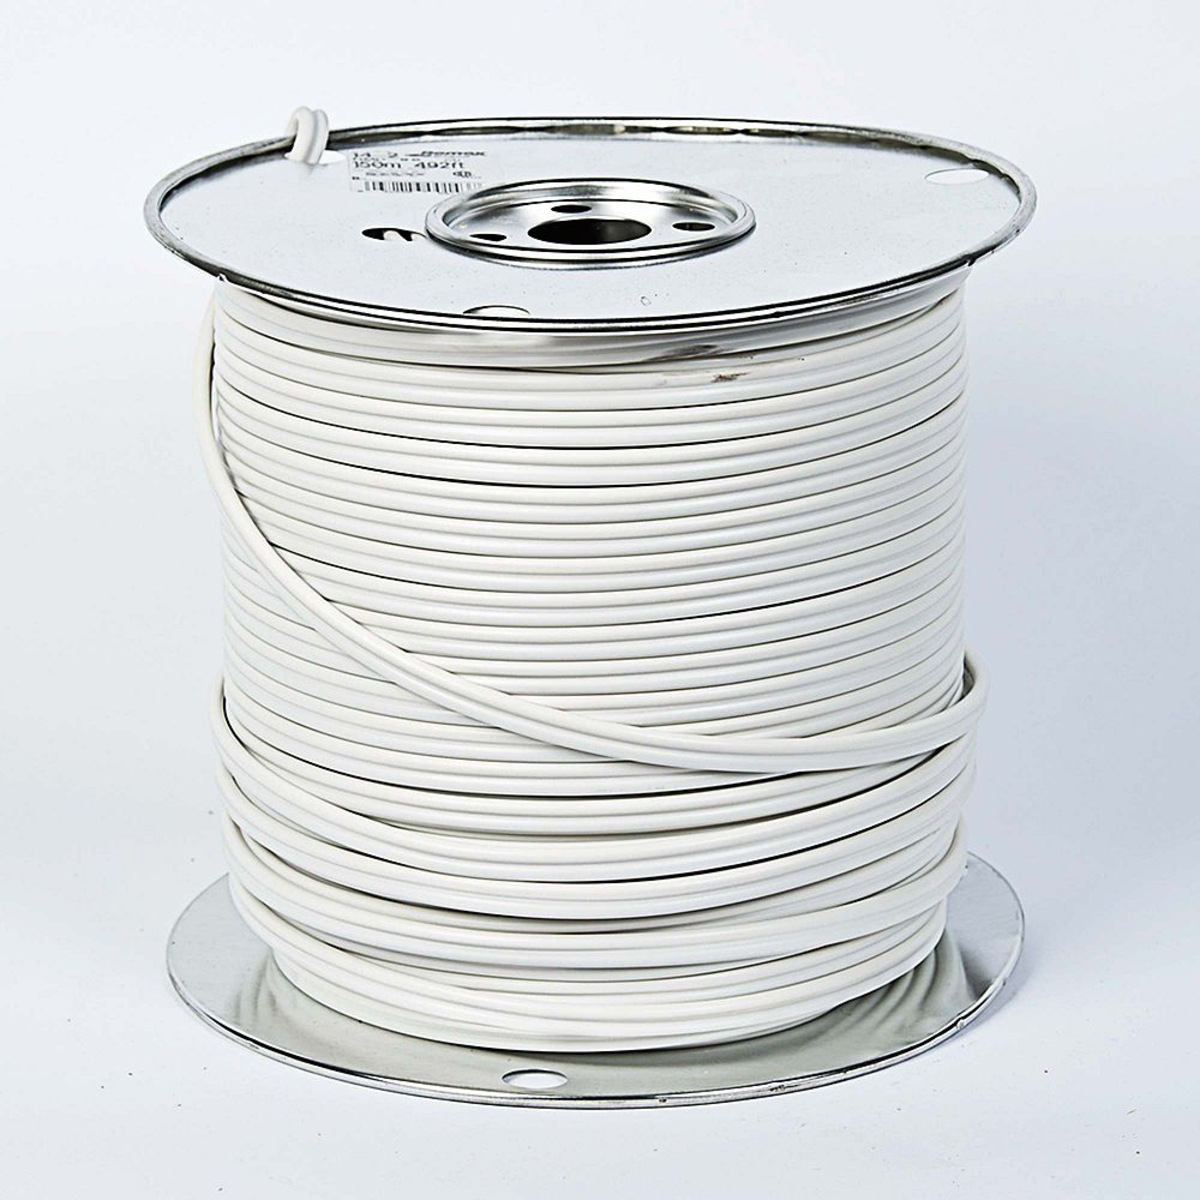 10 Best 14 2 Electrical Wire For 2023 1693869654 